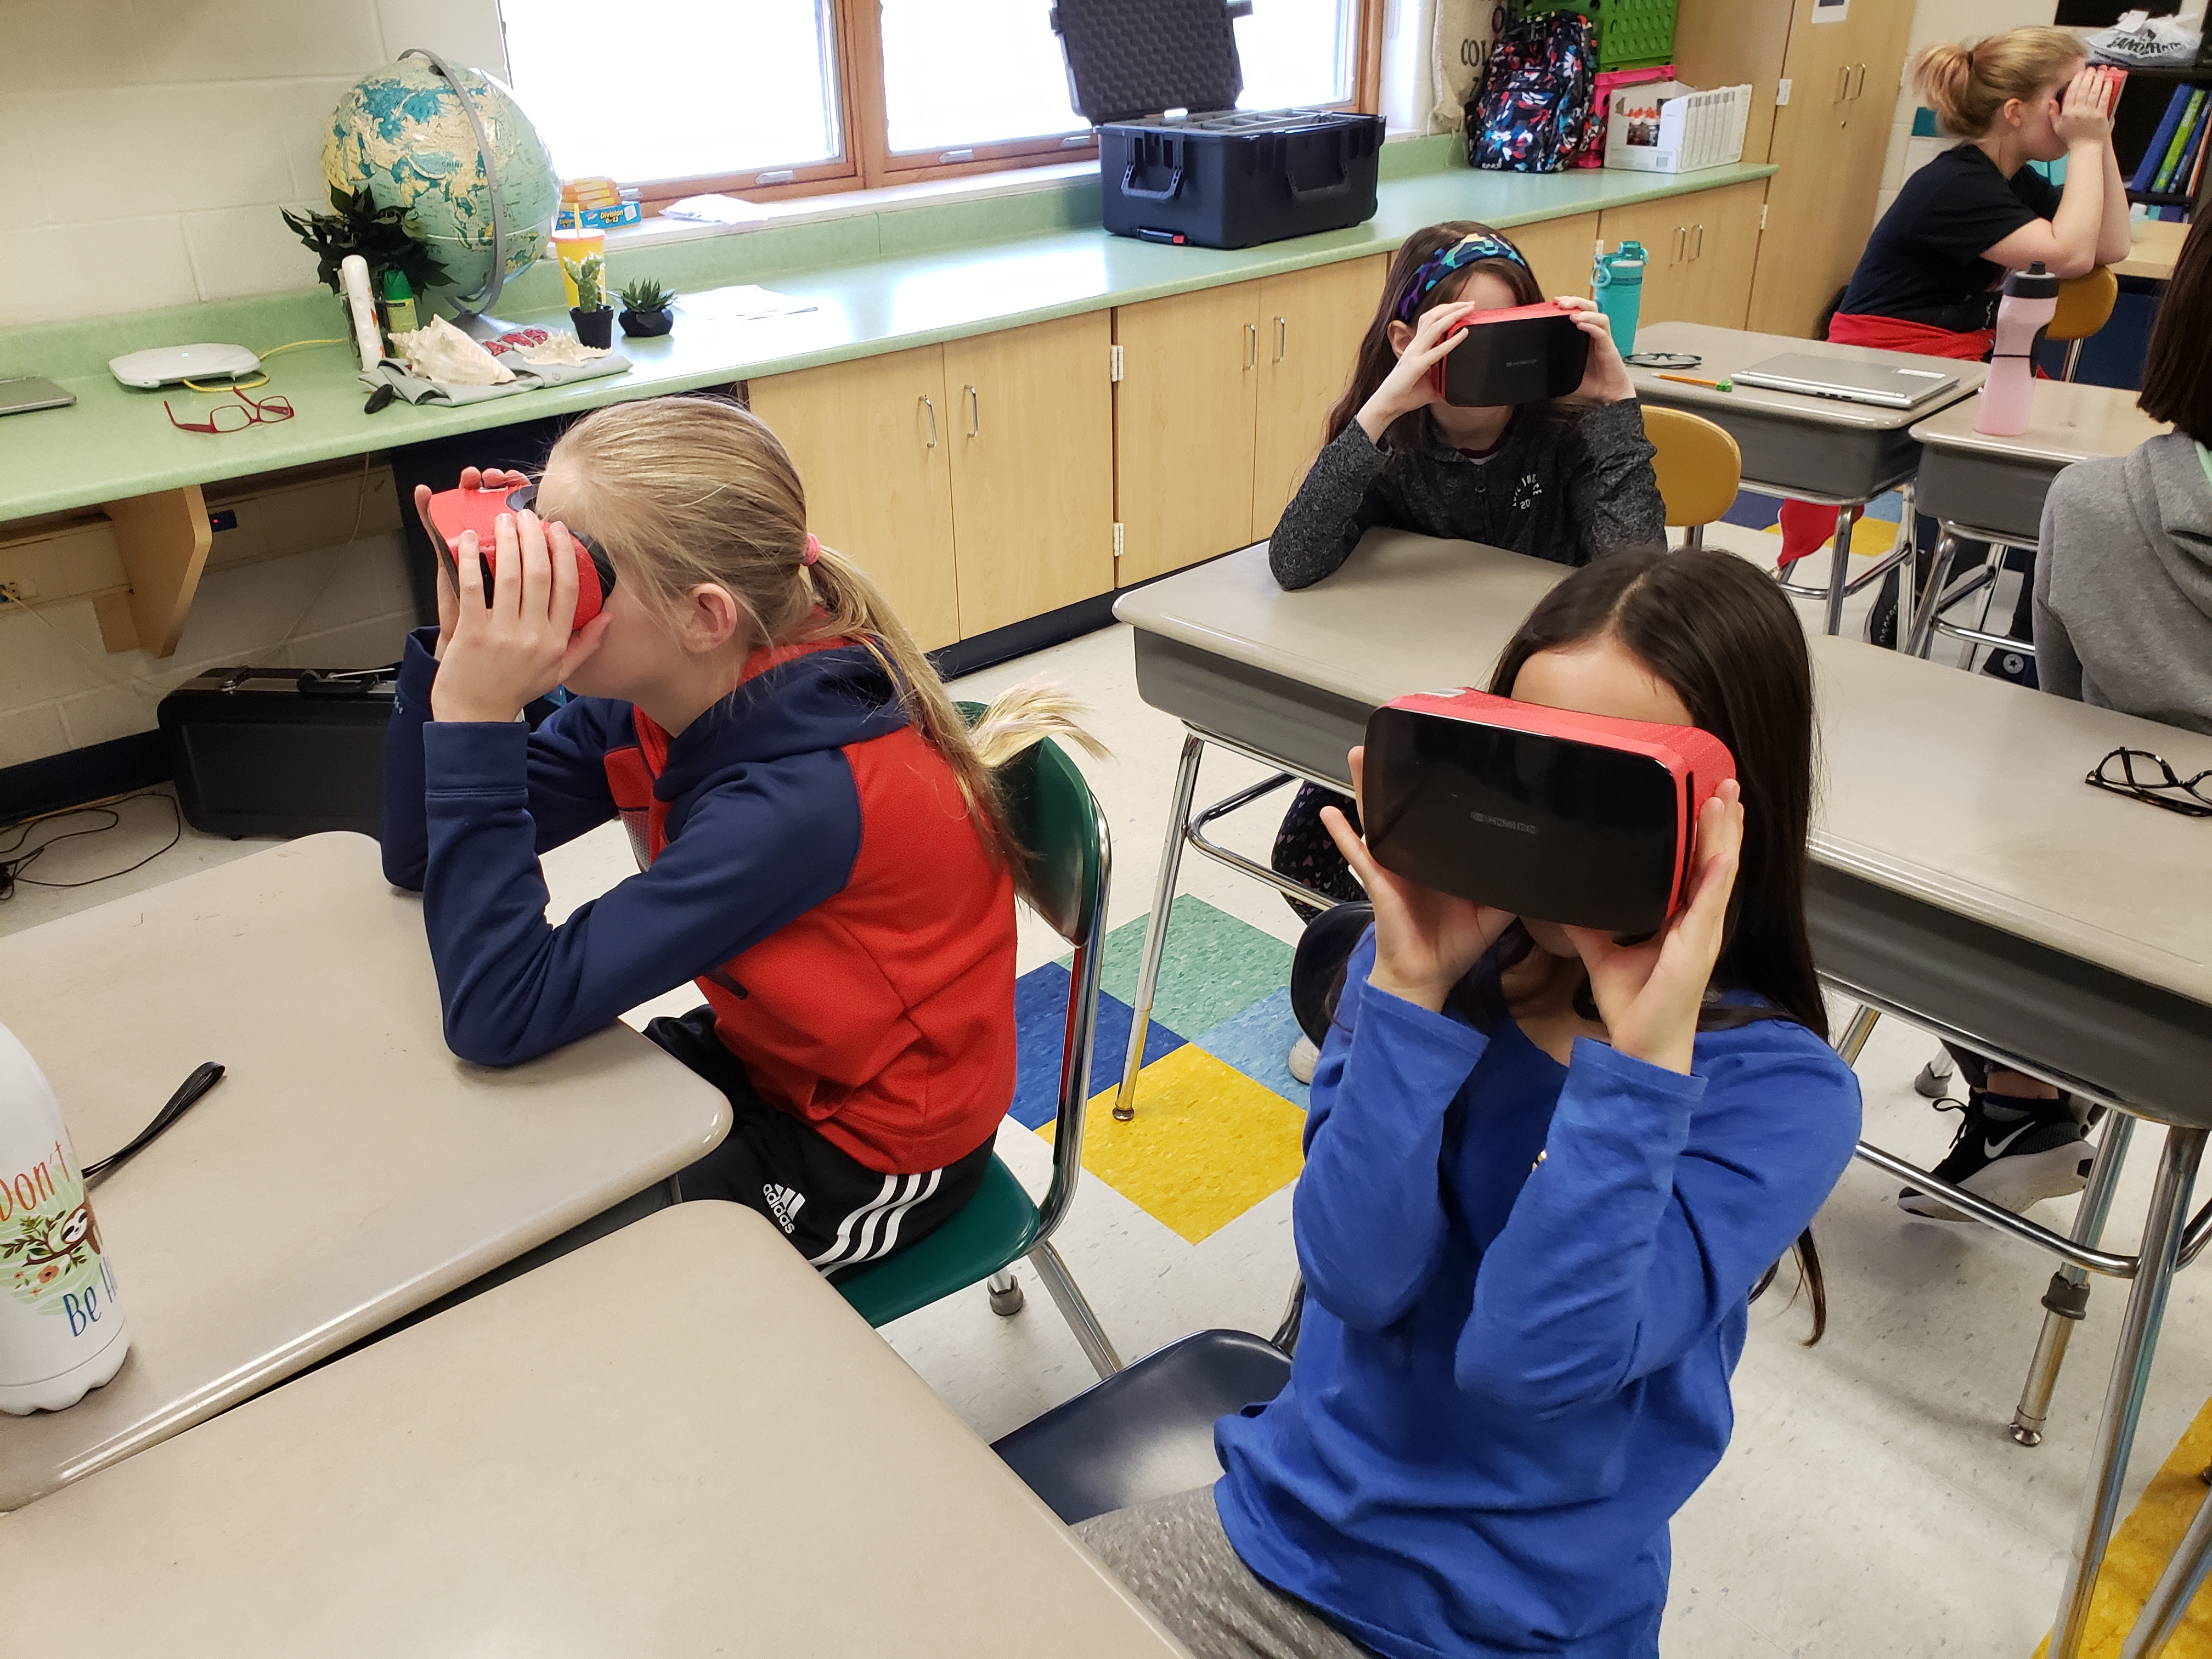 What are the Benefits of VR in a Technical Classroom?